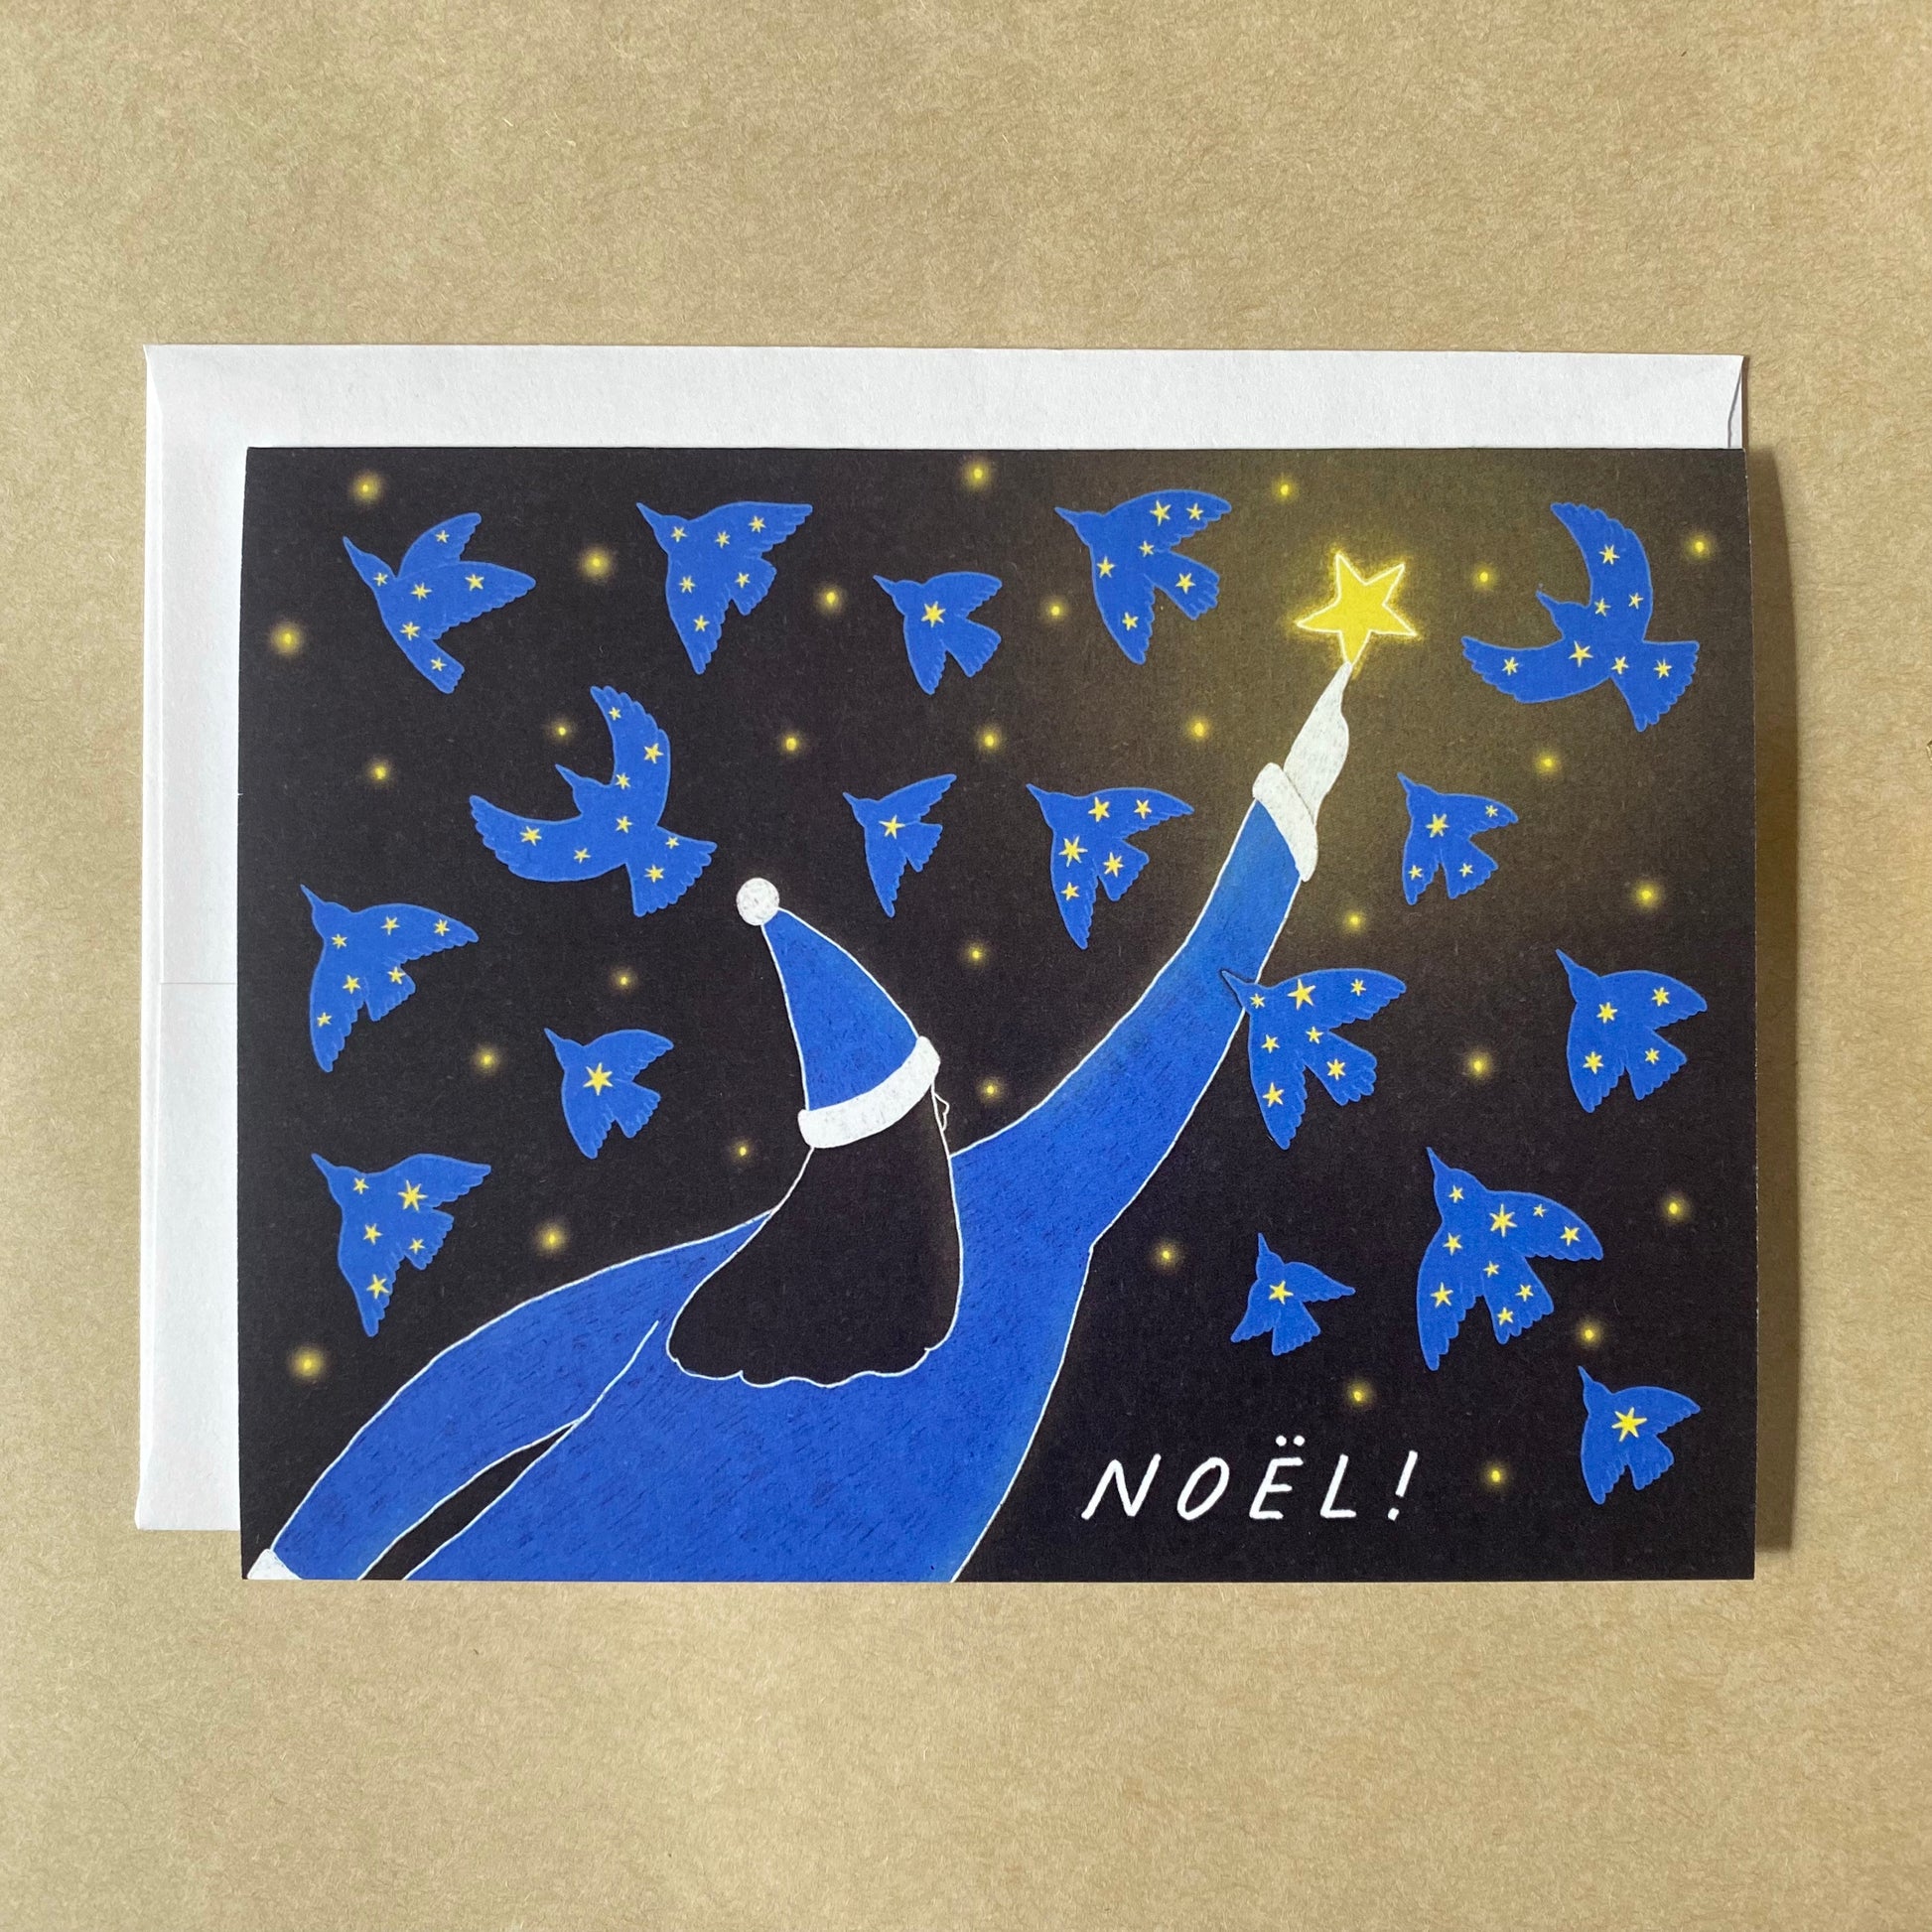 Dreamy french holiday cards with the illustration of lots of birds flying with the starry sky in their bodies and the woman Santa Claus reaching out to one of the stars